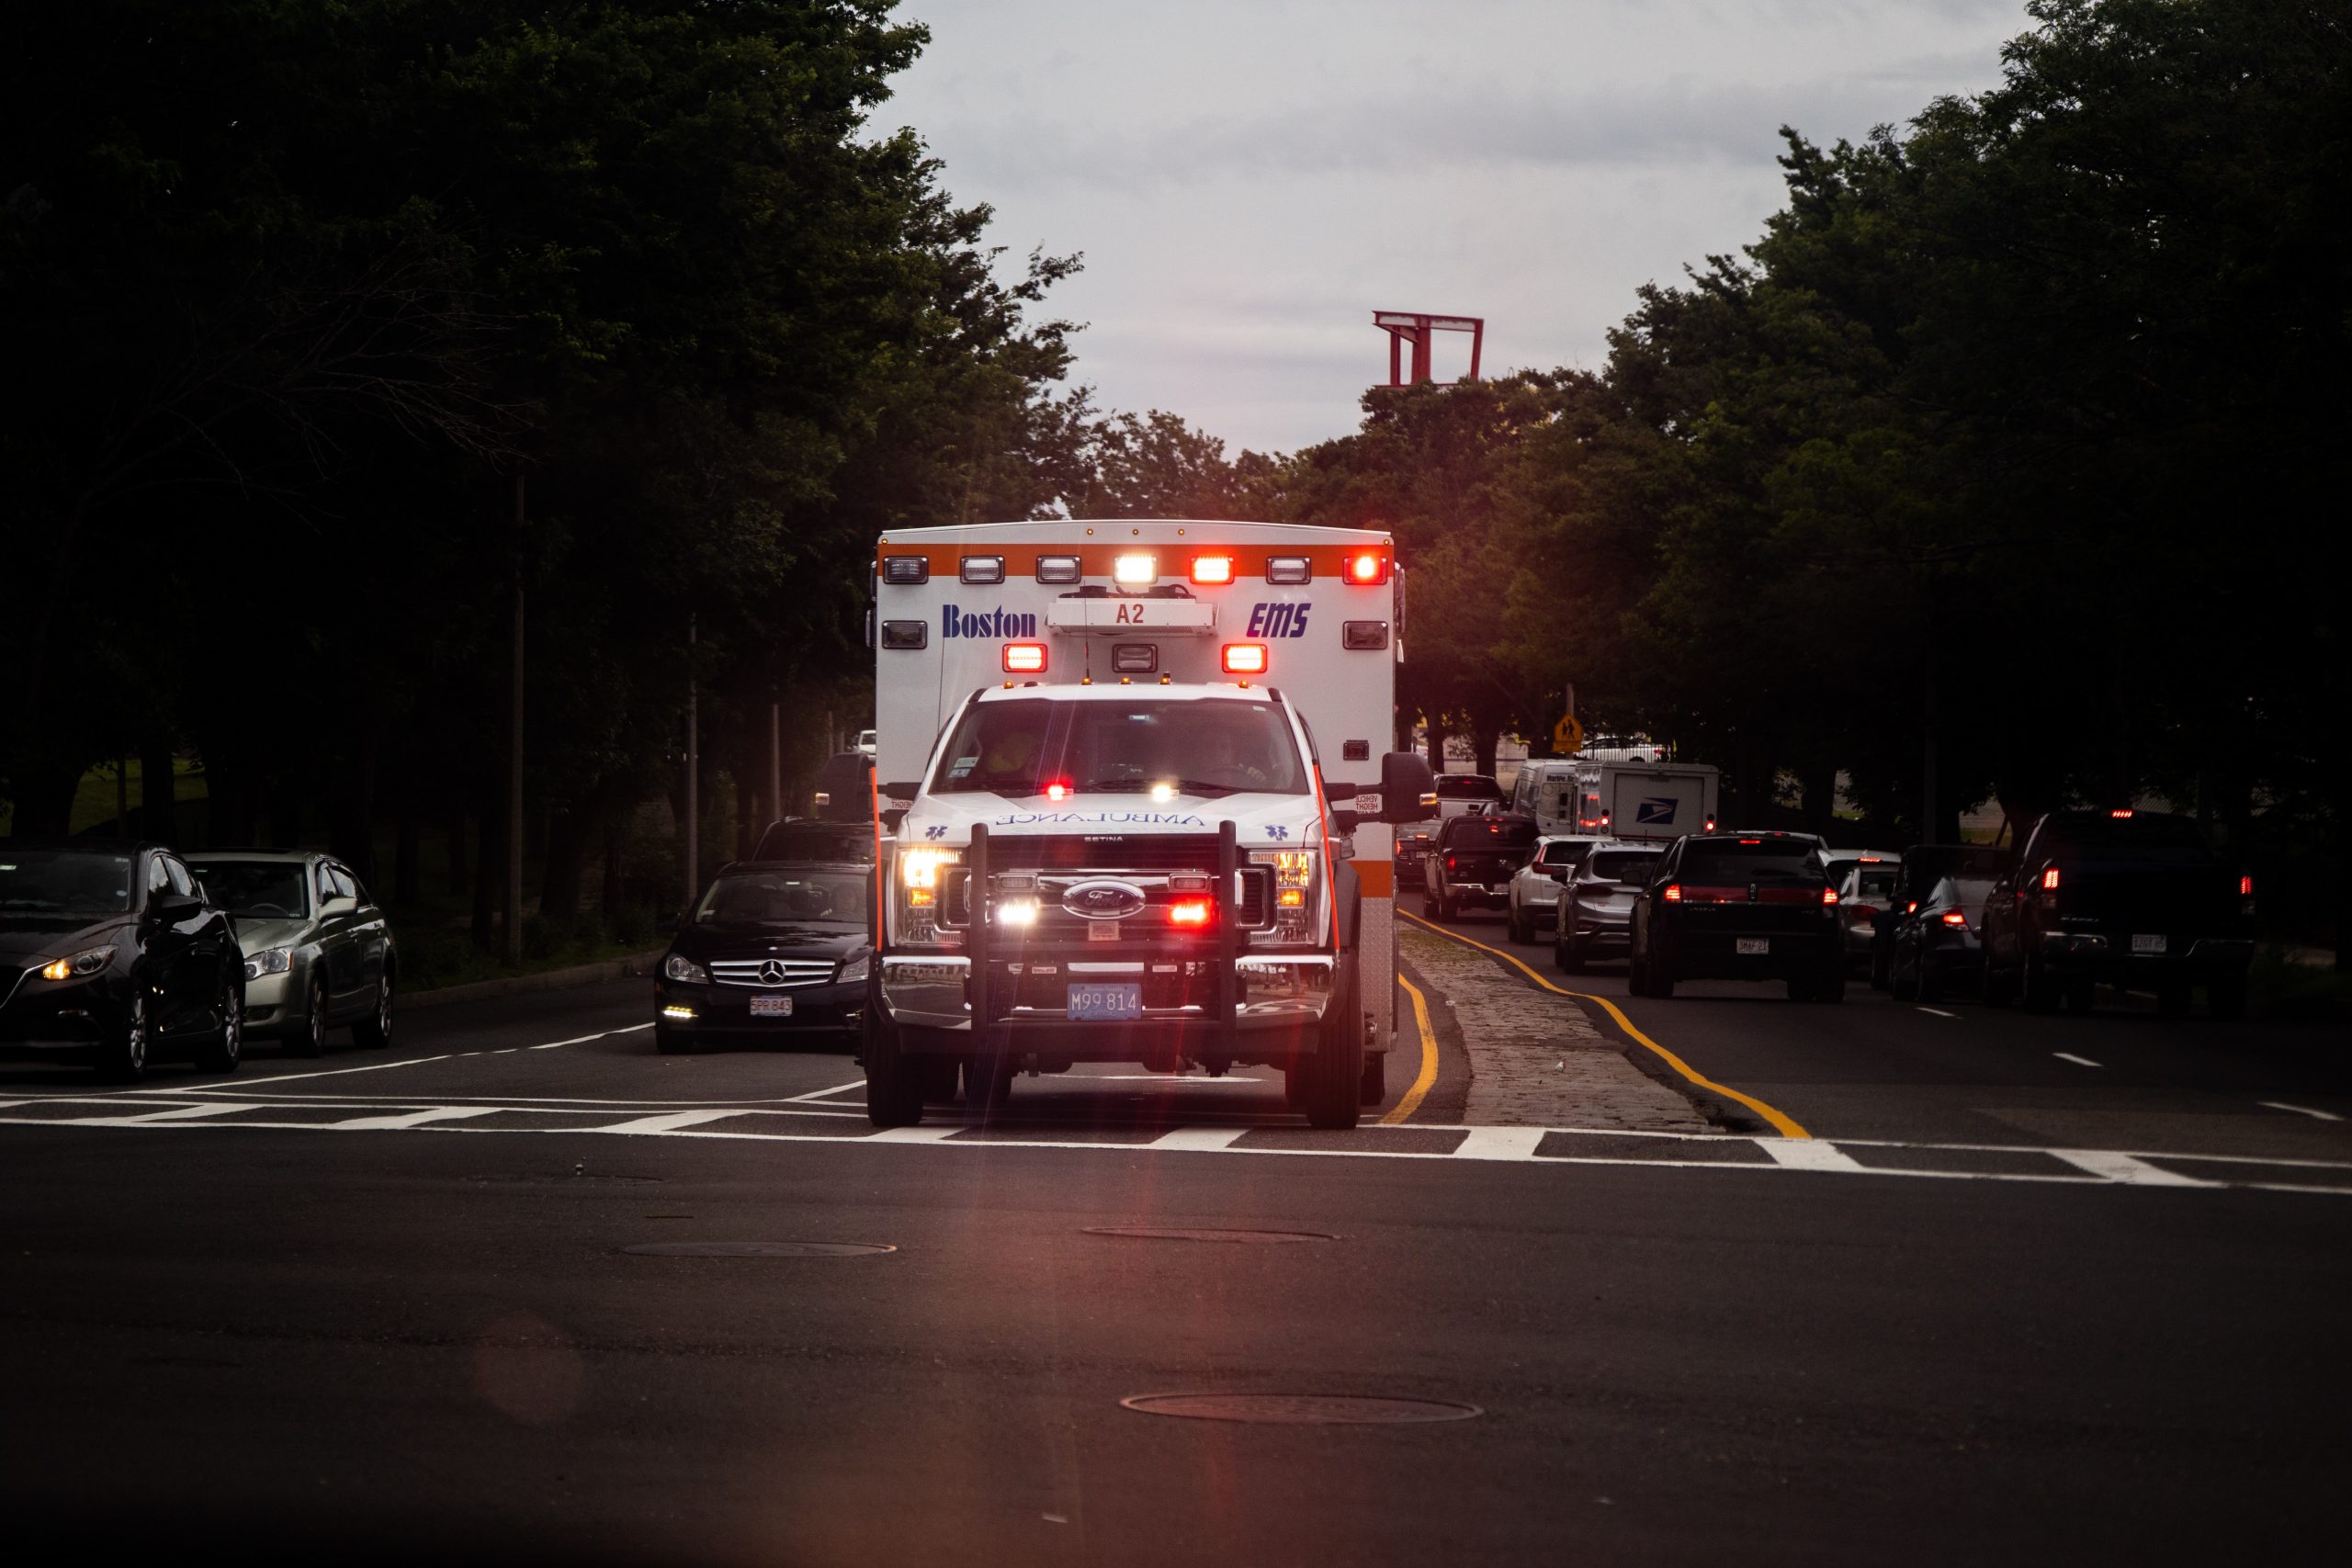 The Role Of Ground Ambulances In Healthcare